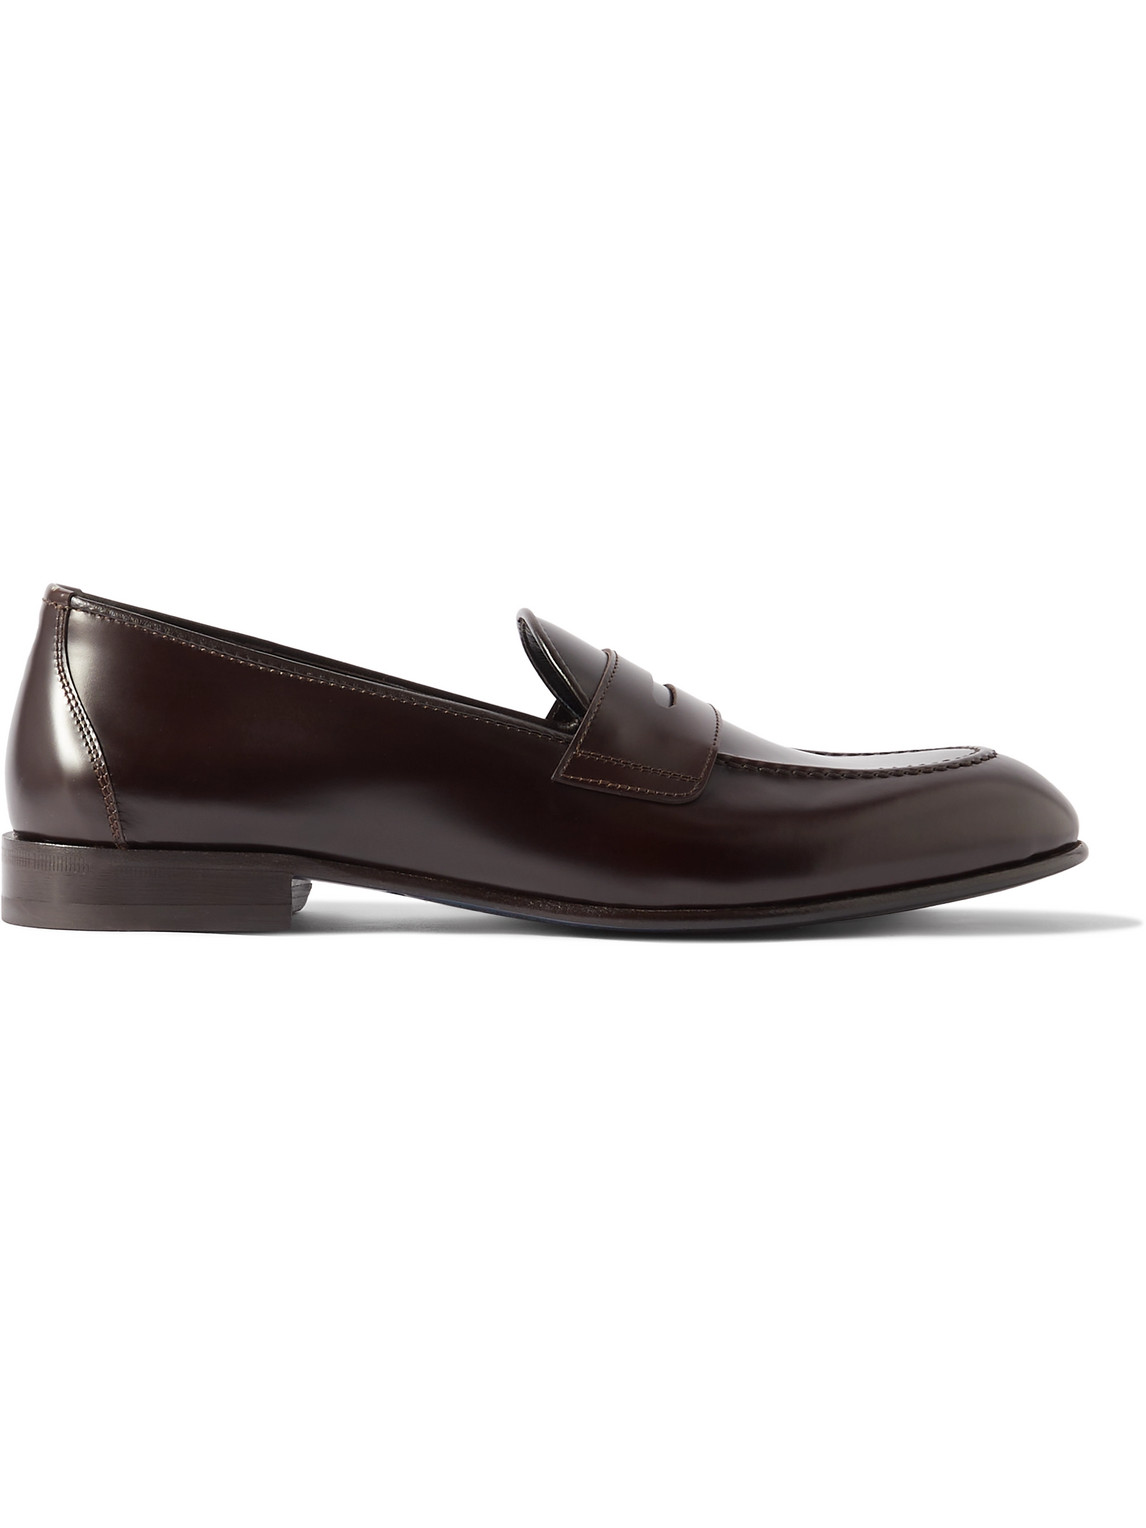 Glossed-Leather Penny Loafers